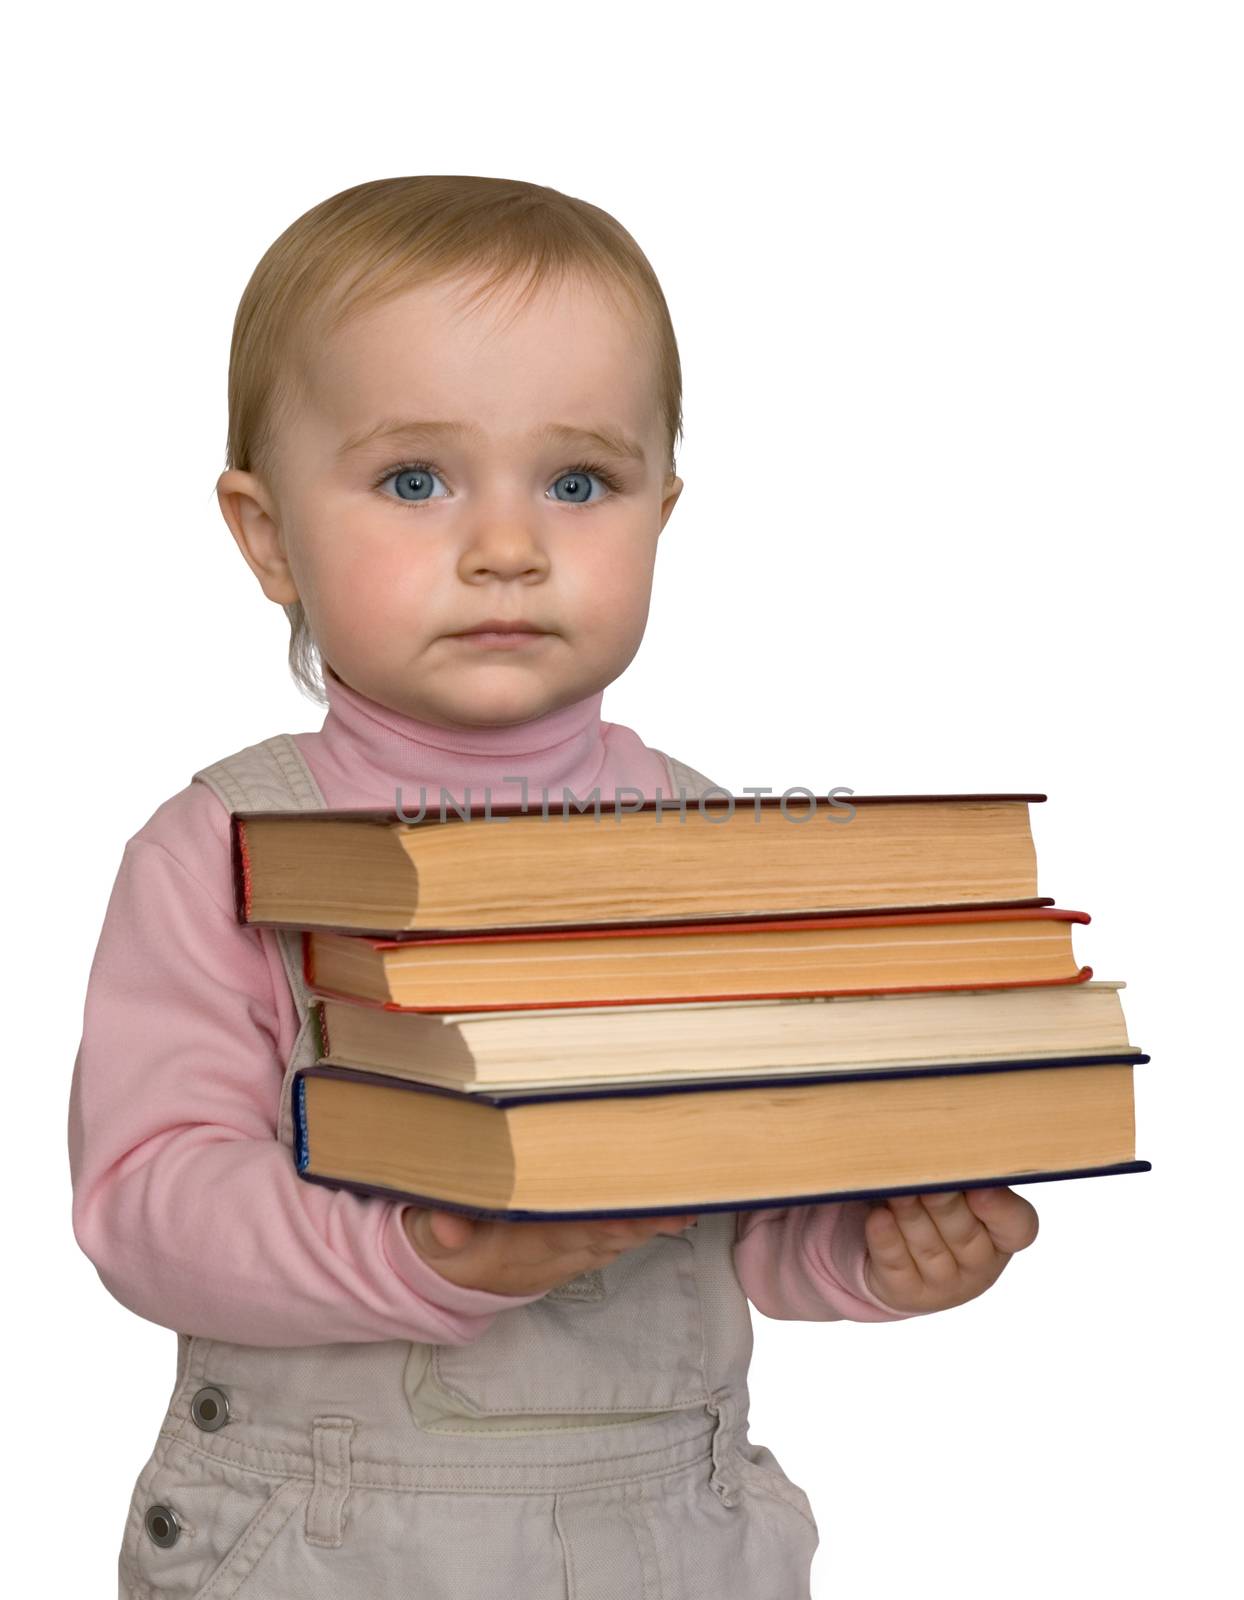 Modern children want to know much! Books are necessary for them!